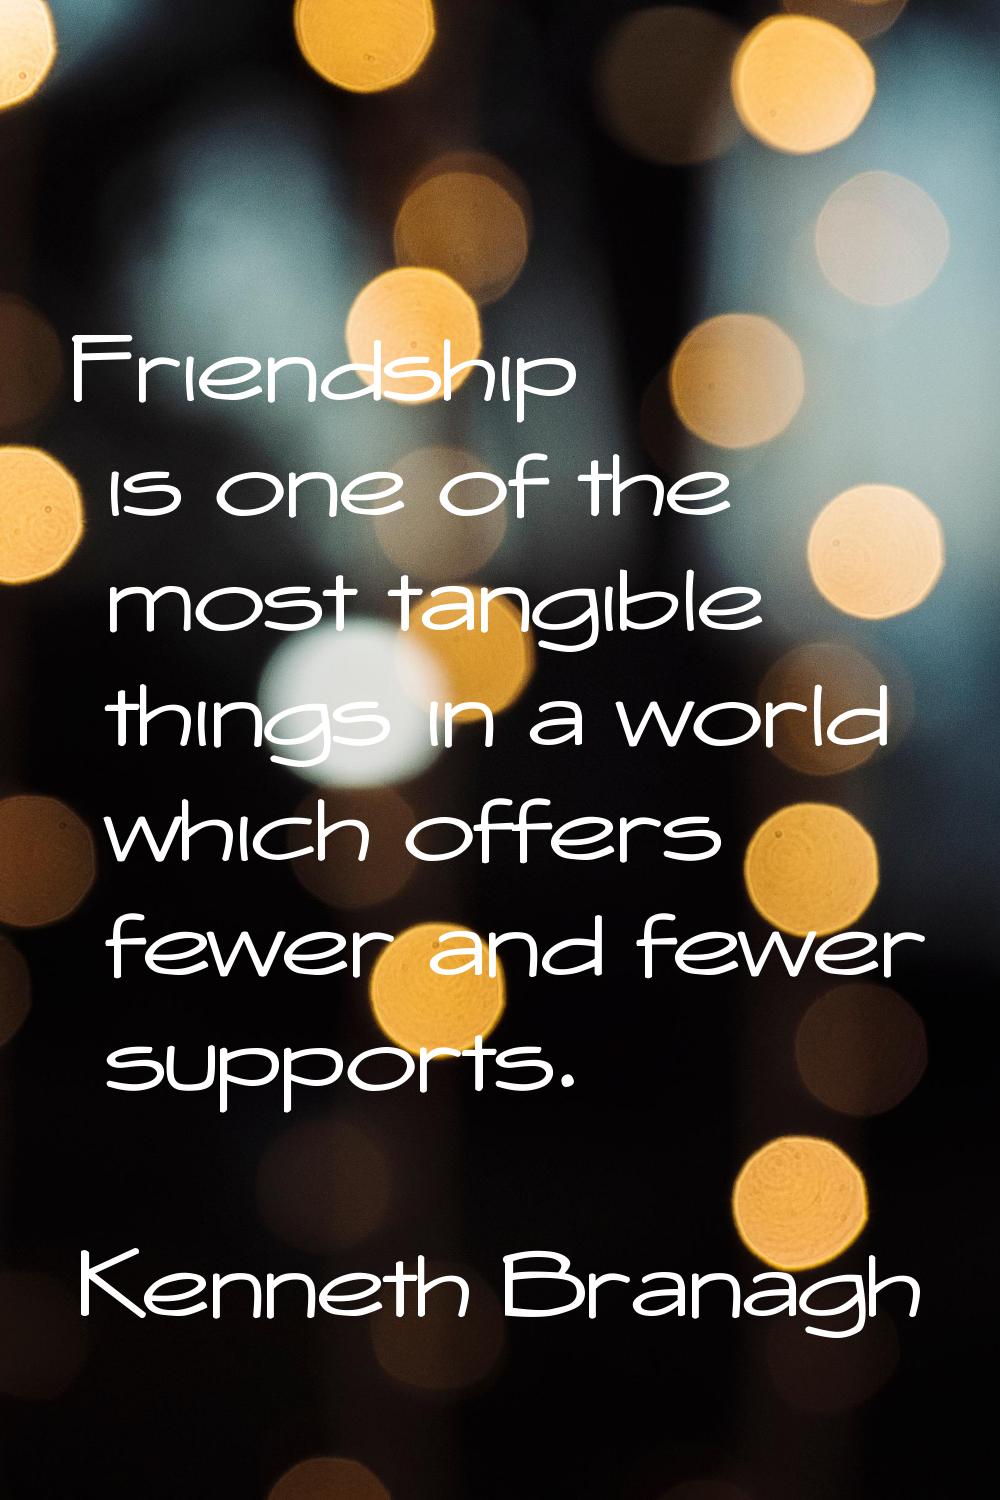 Friendship is one of the most tangible things in a world which offers fewer and fewer supports.